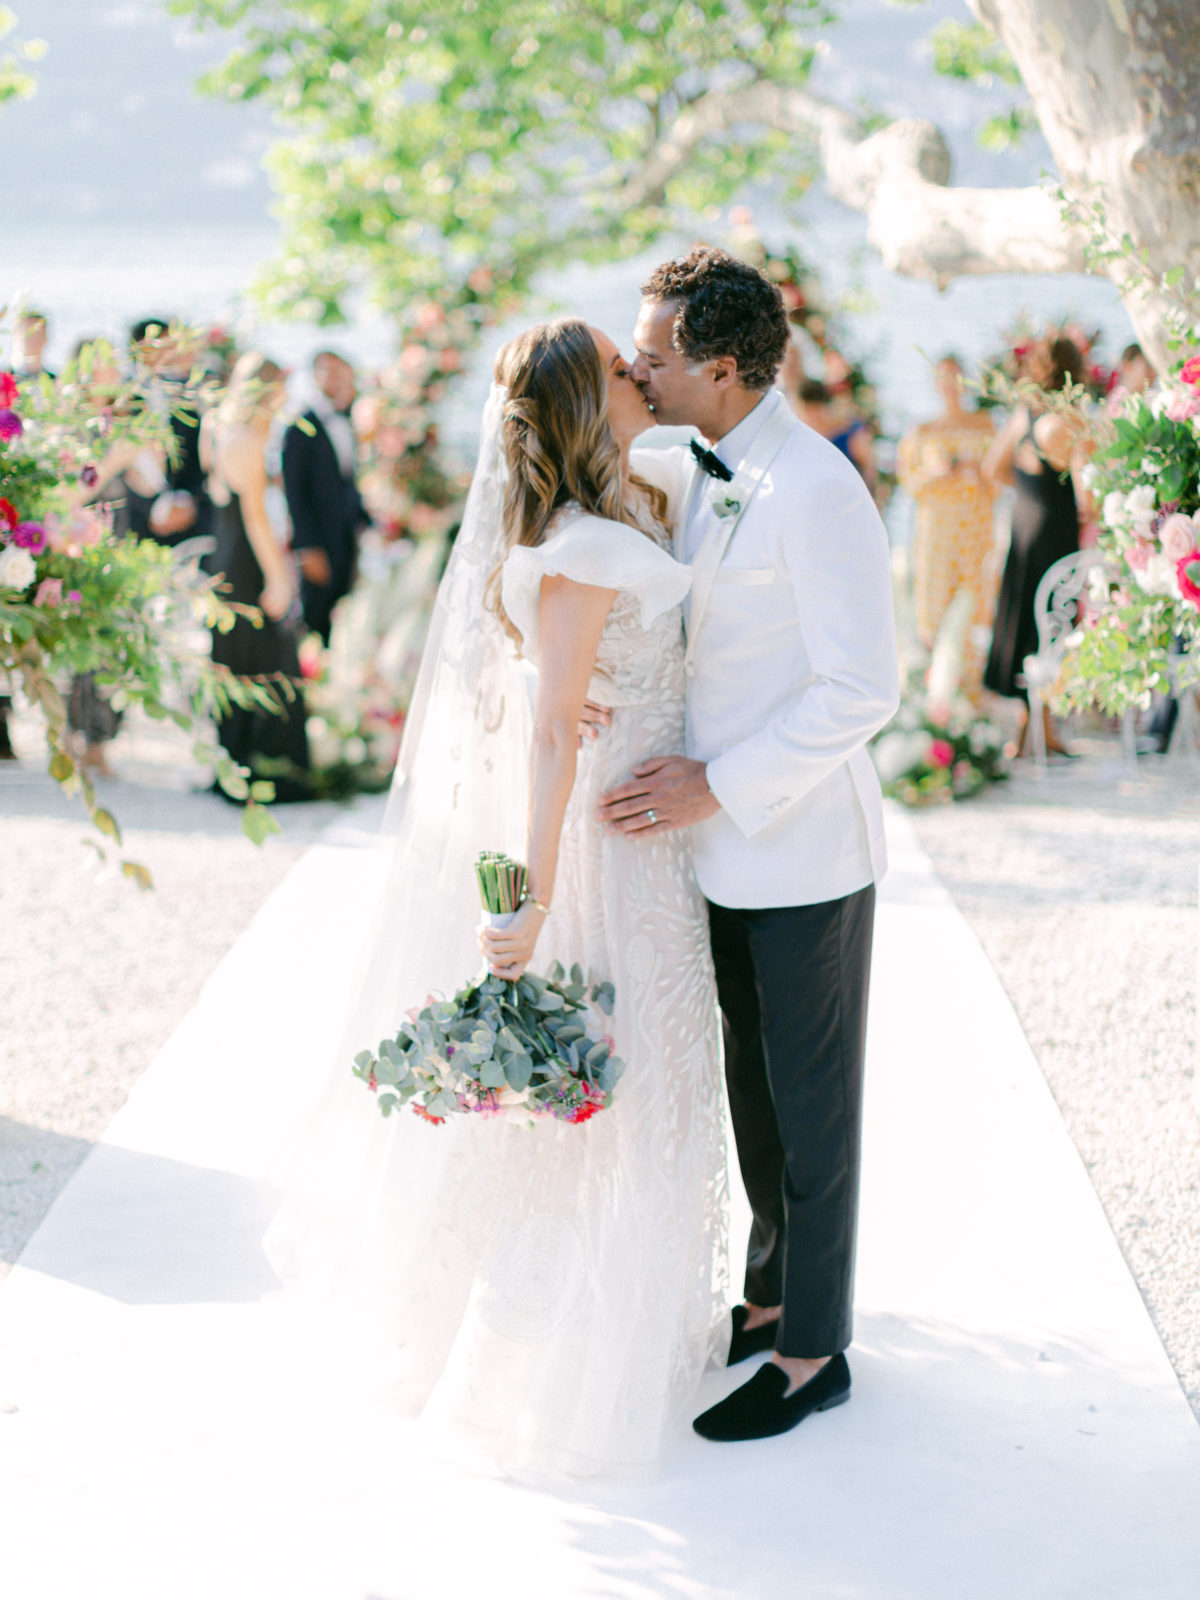 A Pictoresque intimate Wedding in Lake Como at Mandarin Oriental with a unique Reem Acra Dress